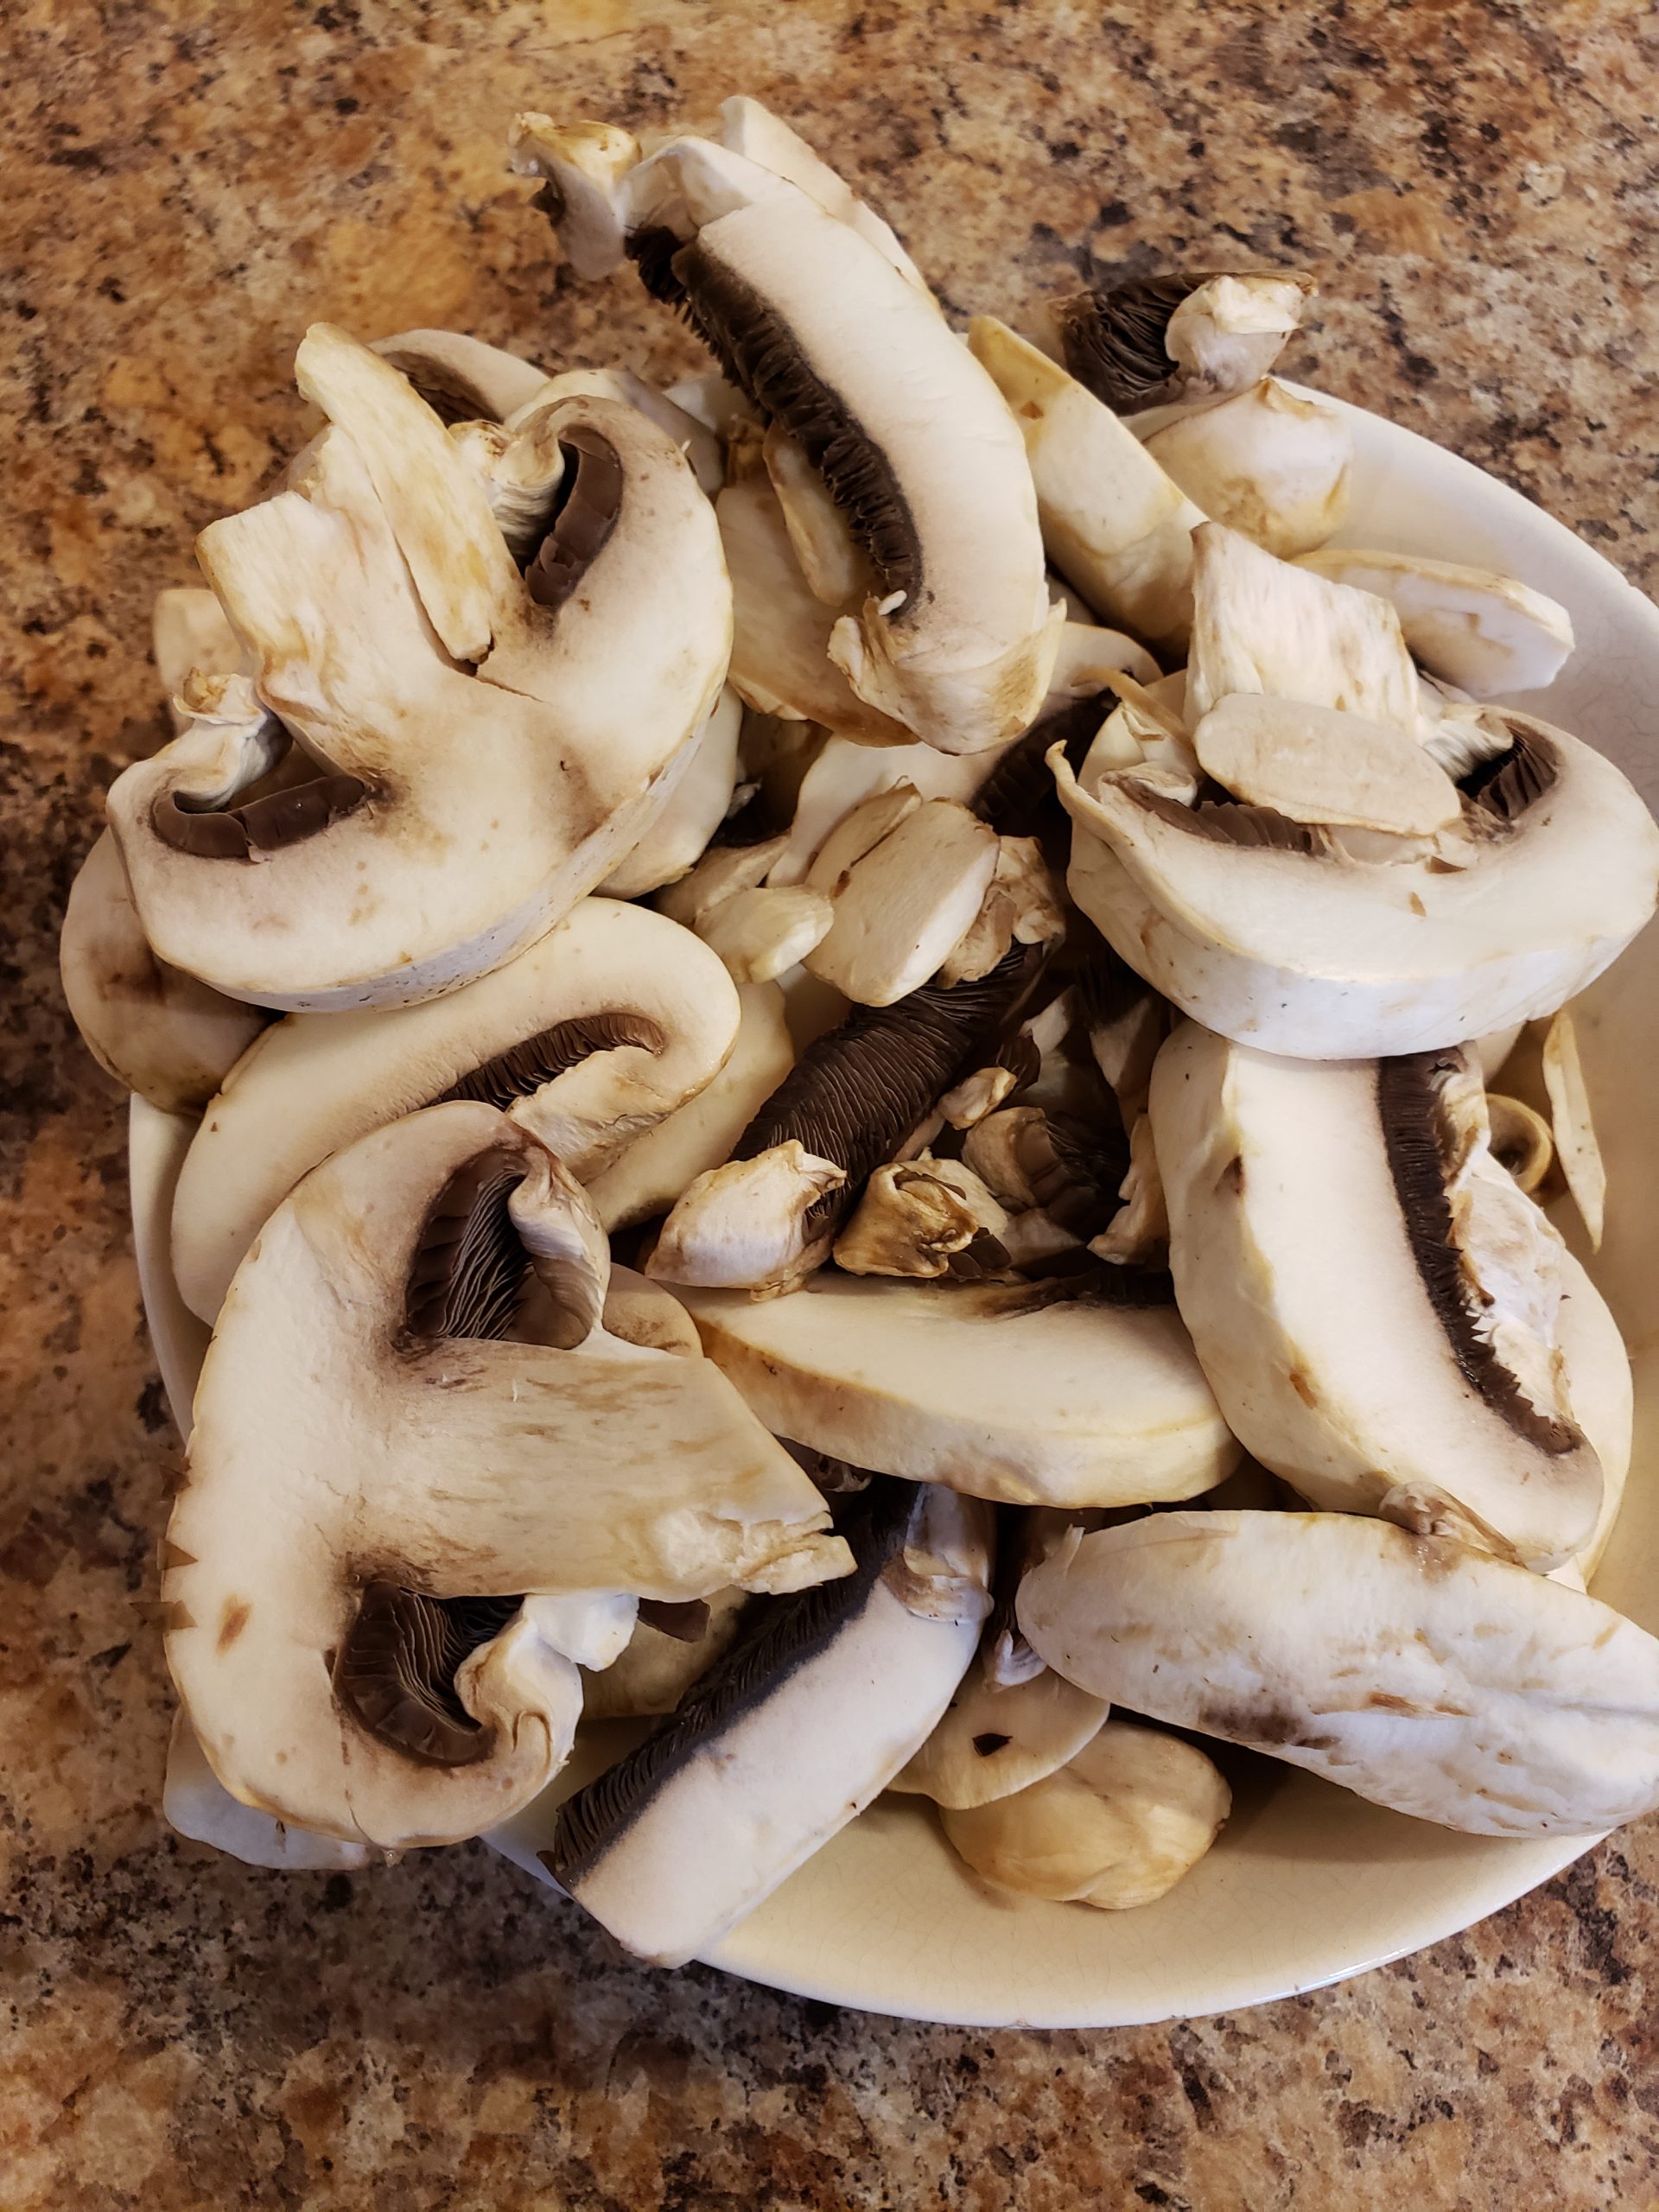 Mushrooms are the new superfood; MUSHROOMS Postrun Potassium From white button to the more exotic maitake mushrooms, these fungi supply potassium crucial for body fluid balance. Mushrooms also contain an antioxidant known as L-ergothioneine not found in many foods and known to help fight off free-radical damage. 